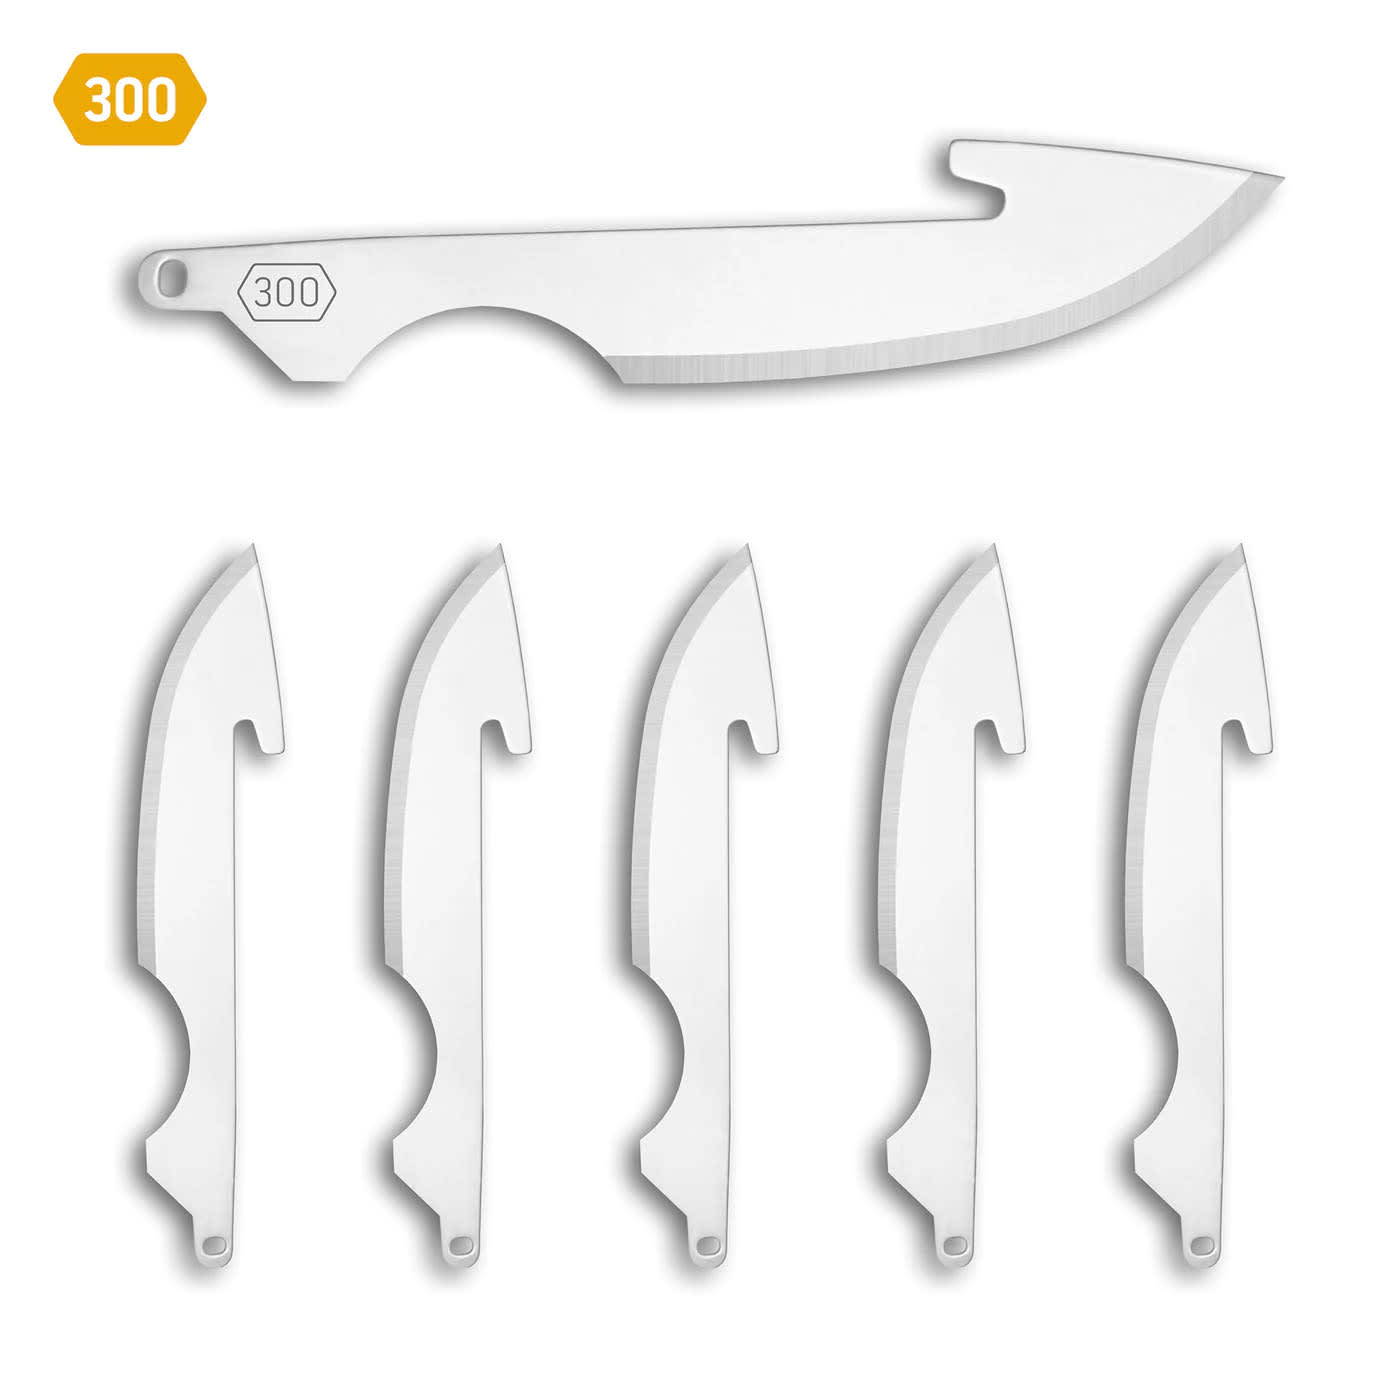 Outdoor Edge® 300 (3.0”) RazorSafe Caping Replacement Blade 6-Pack 